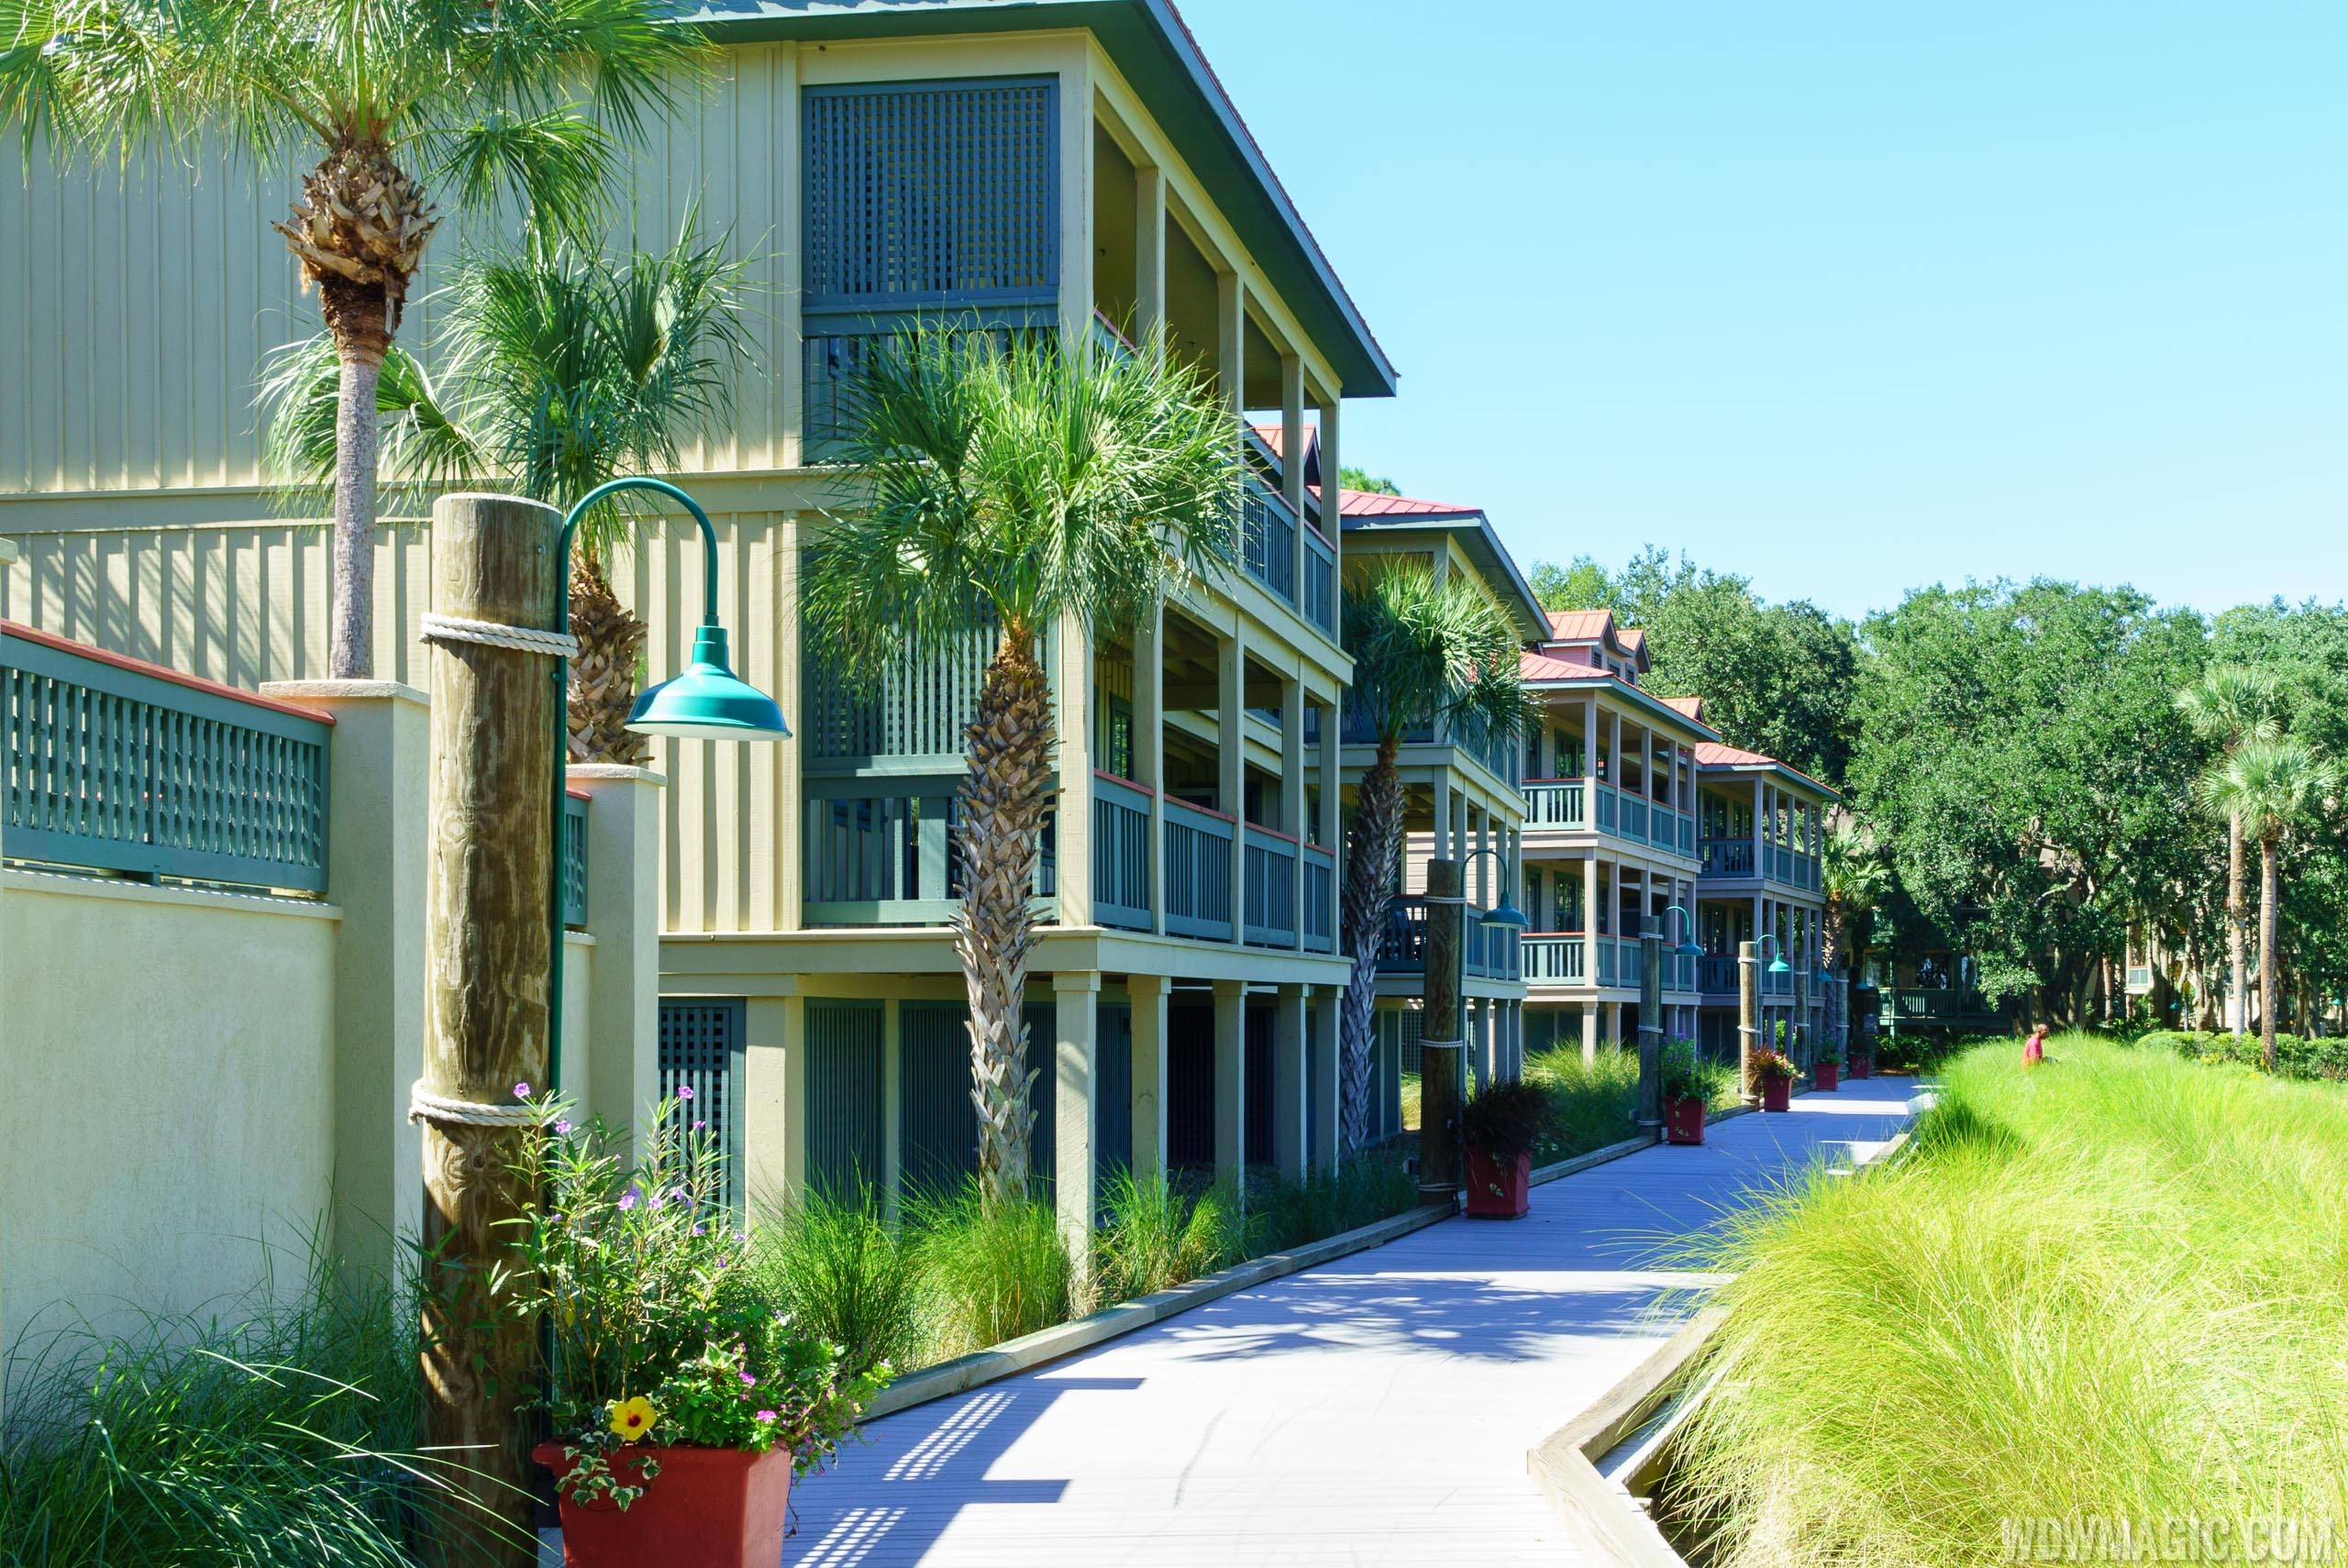 Disney's Hilton Head Island Resort reopens today following evacuation for Hurricane Florence